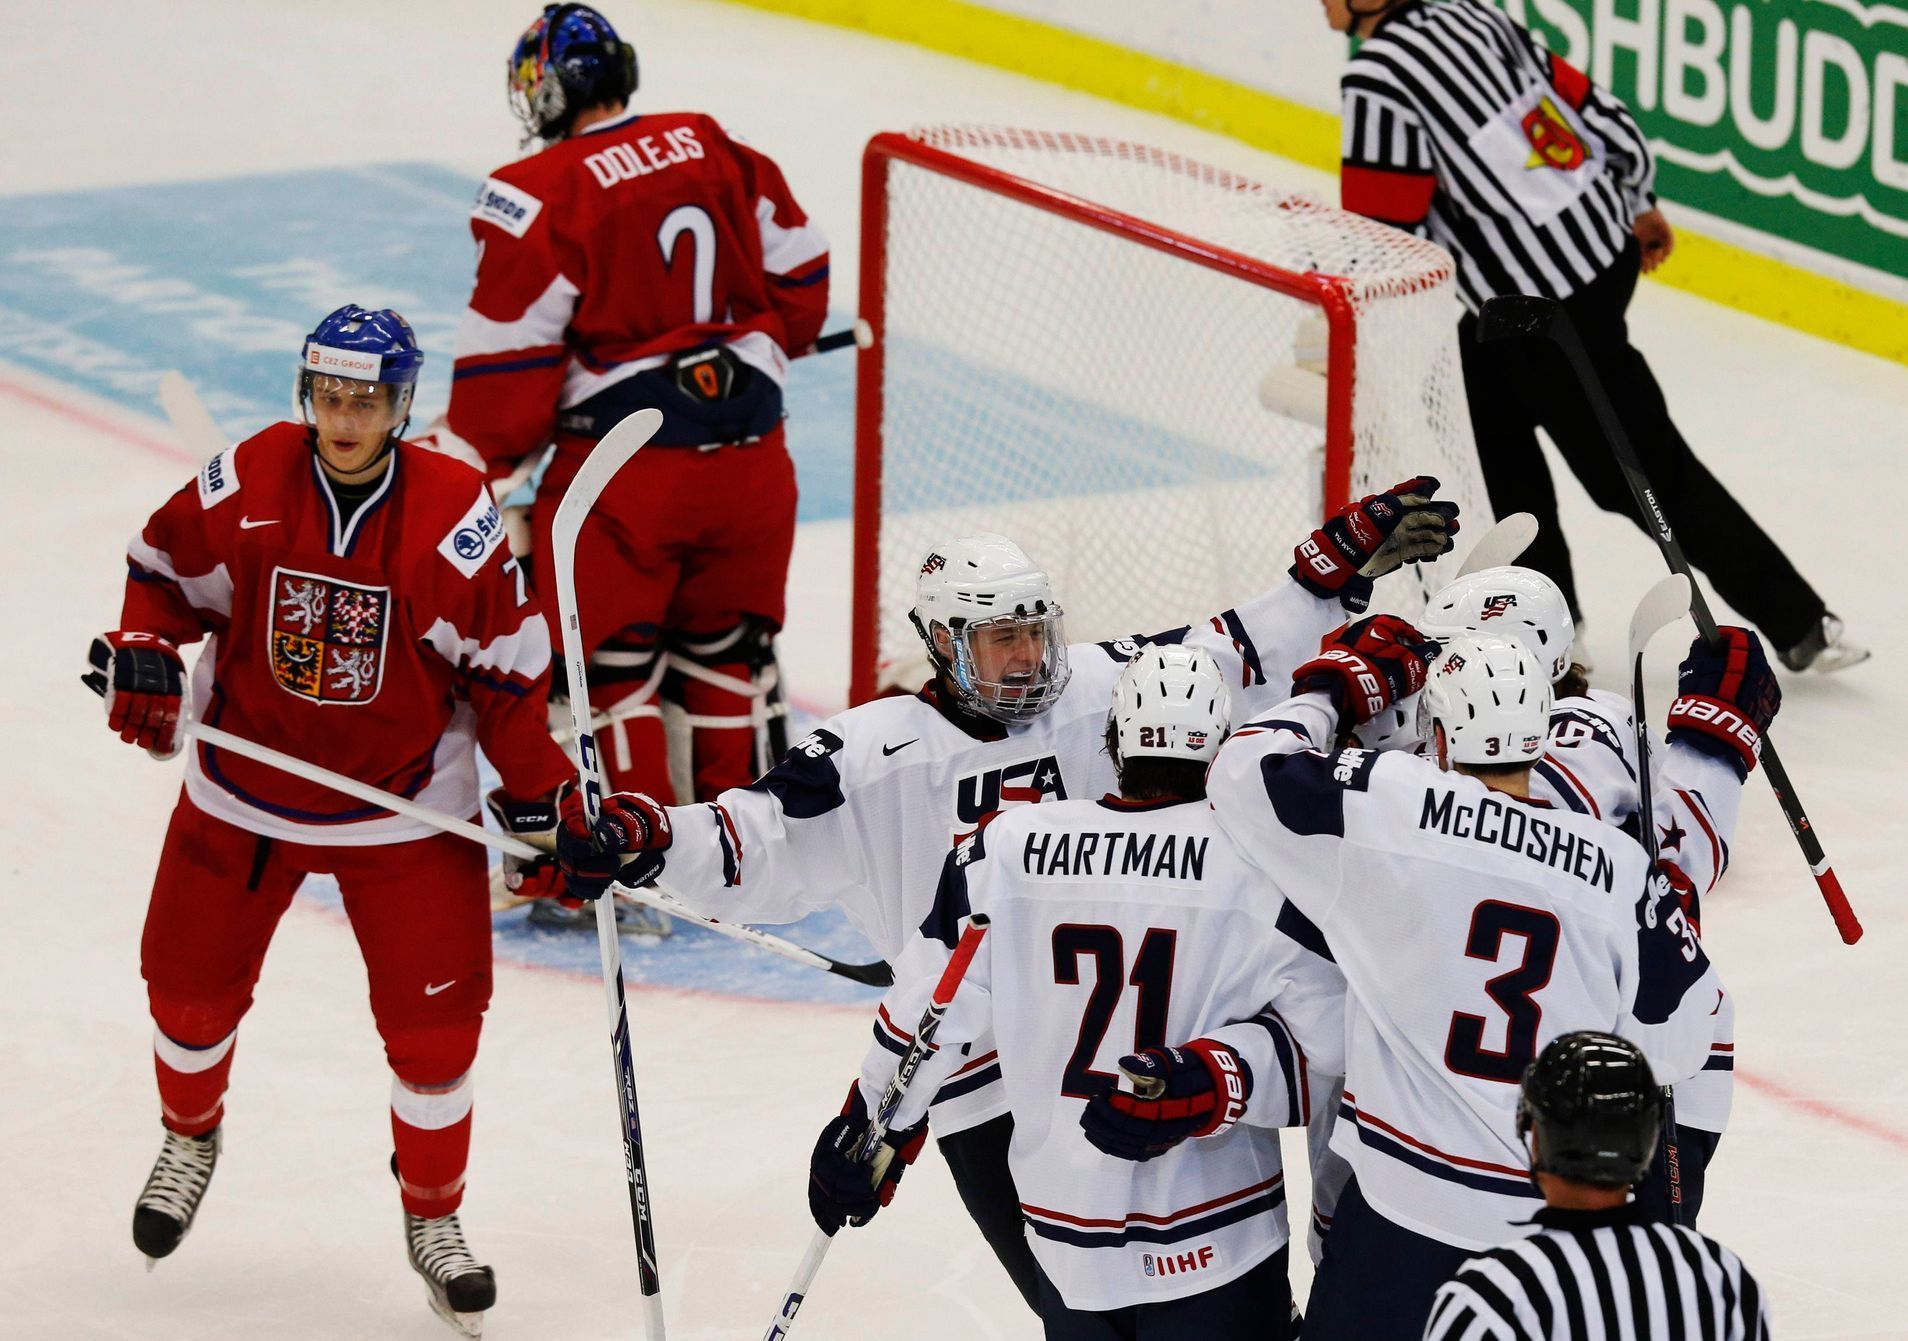 Team USA's players celebrate a goal in front of Czech Republic's Sulak and Dolejs during their IIHF World Junior Championship ice hockey game in Malmo